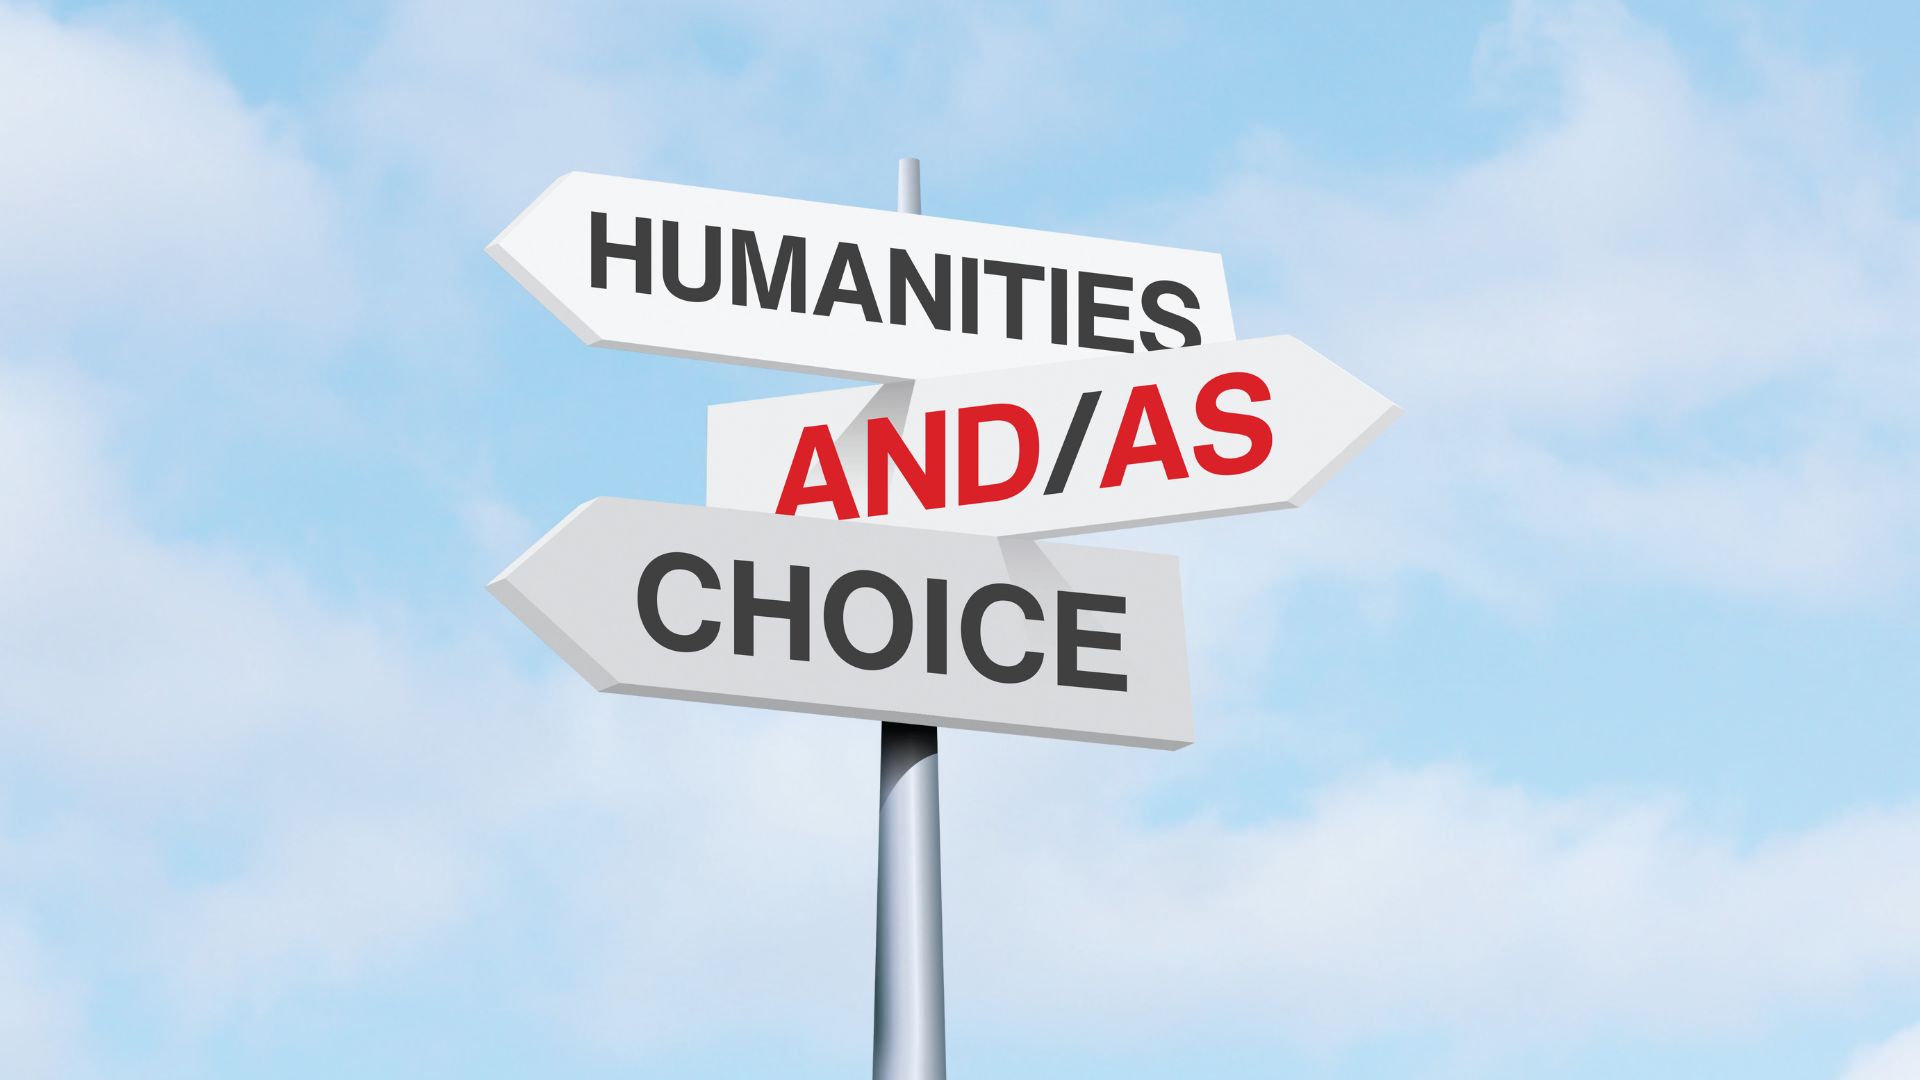 sign posts that read "humanities and/as choice"